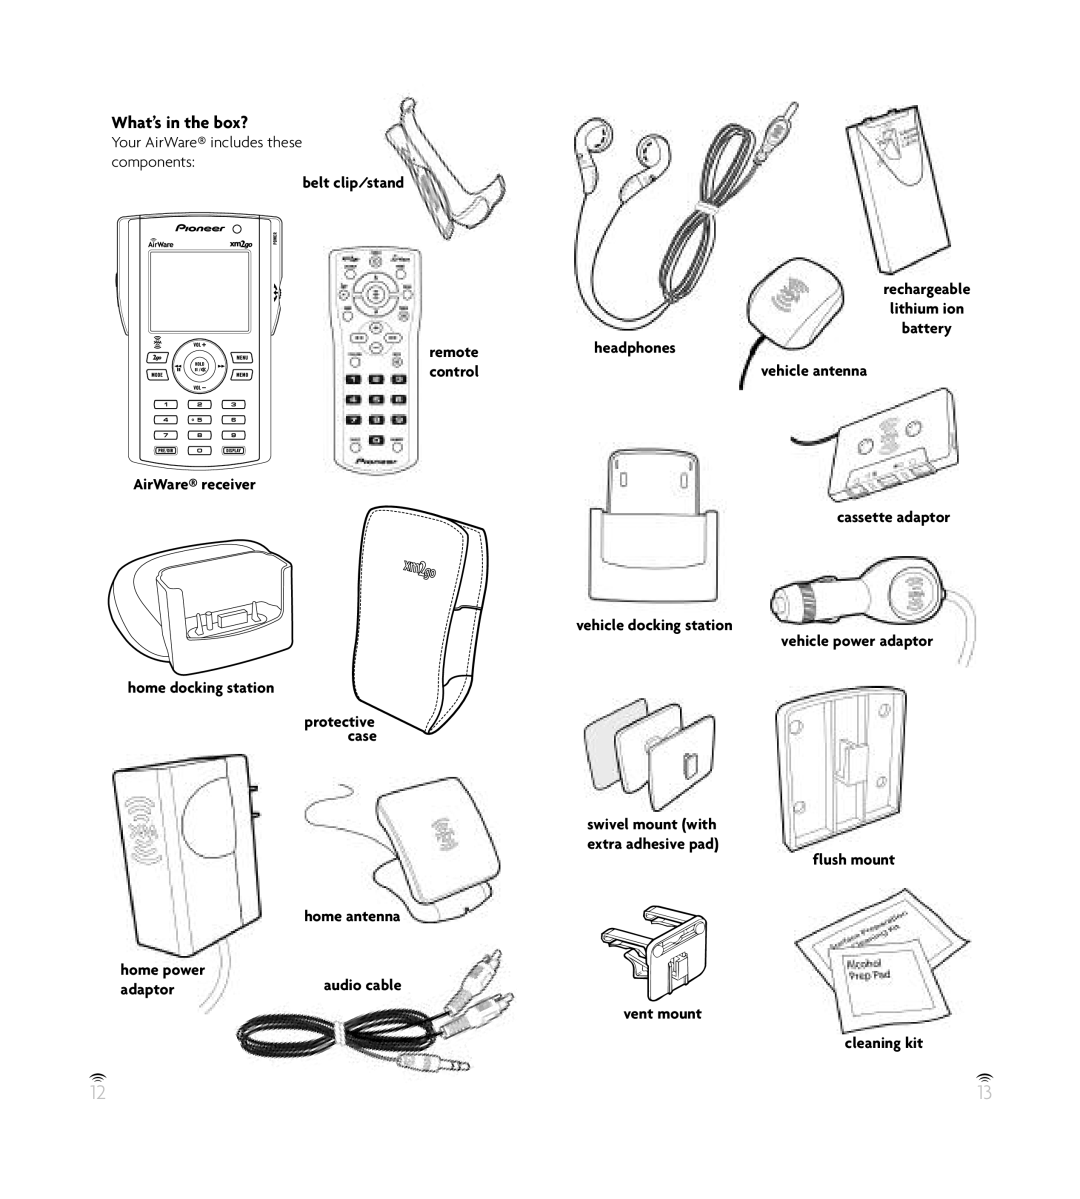 Pioneer GEX-AIRWARE1 manual What’s in the box?, AirWare receiver home docking station, remote, headphones, control 